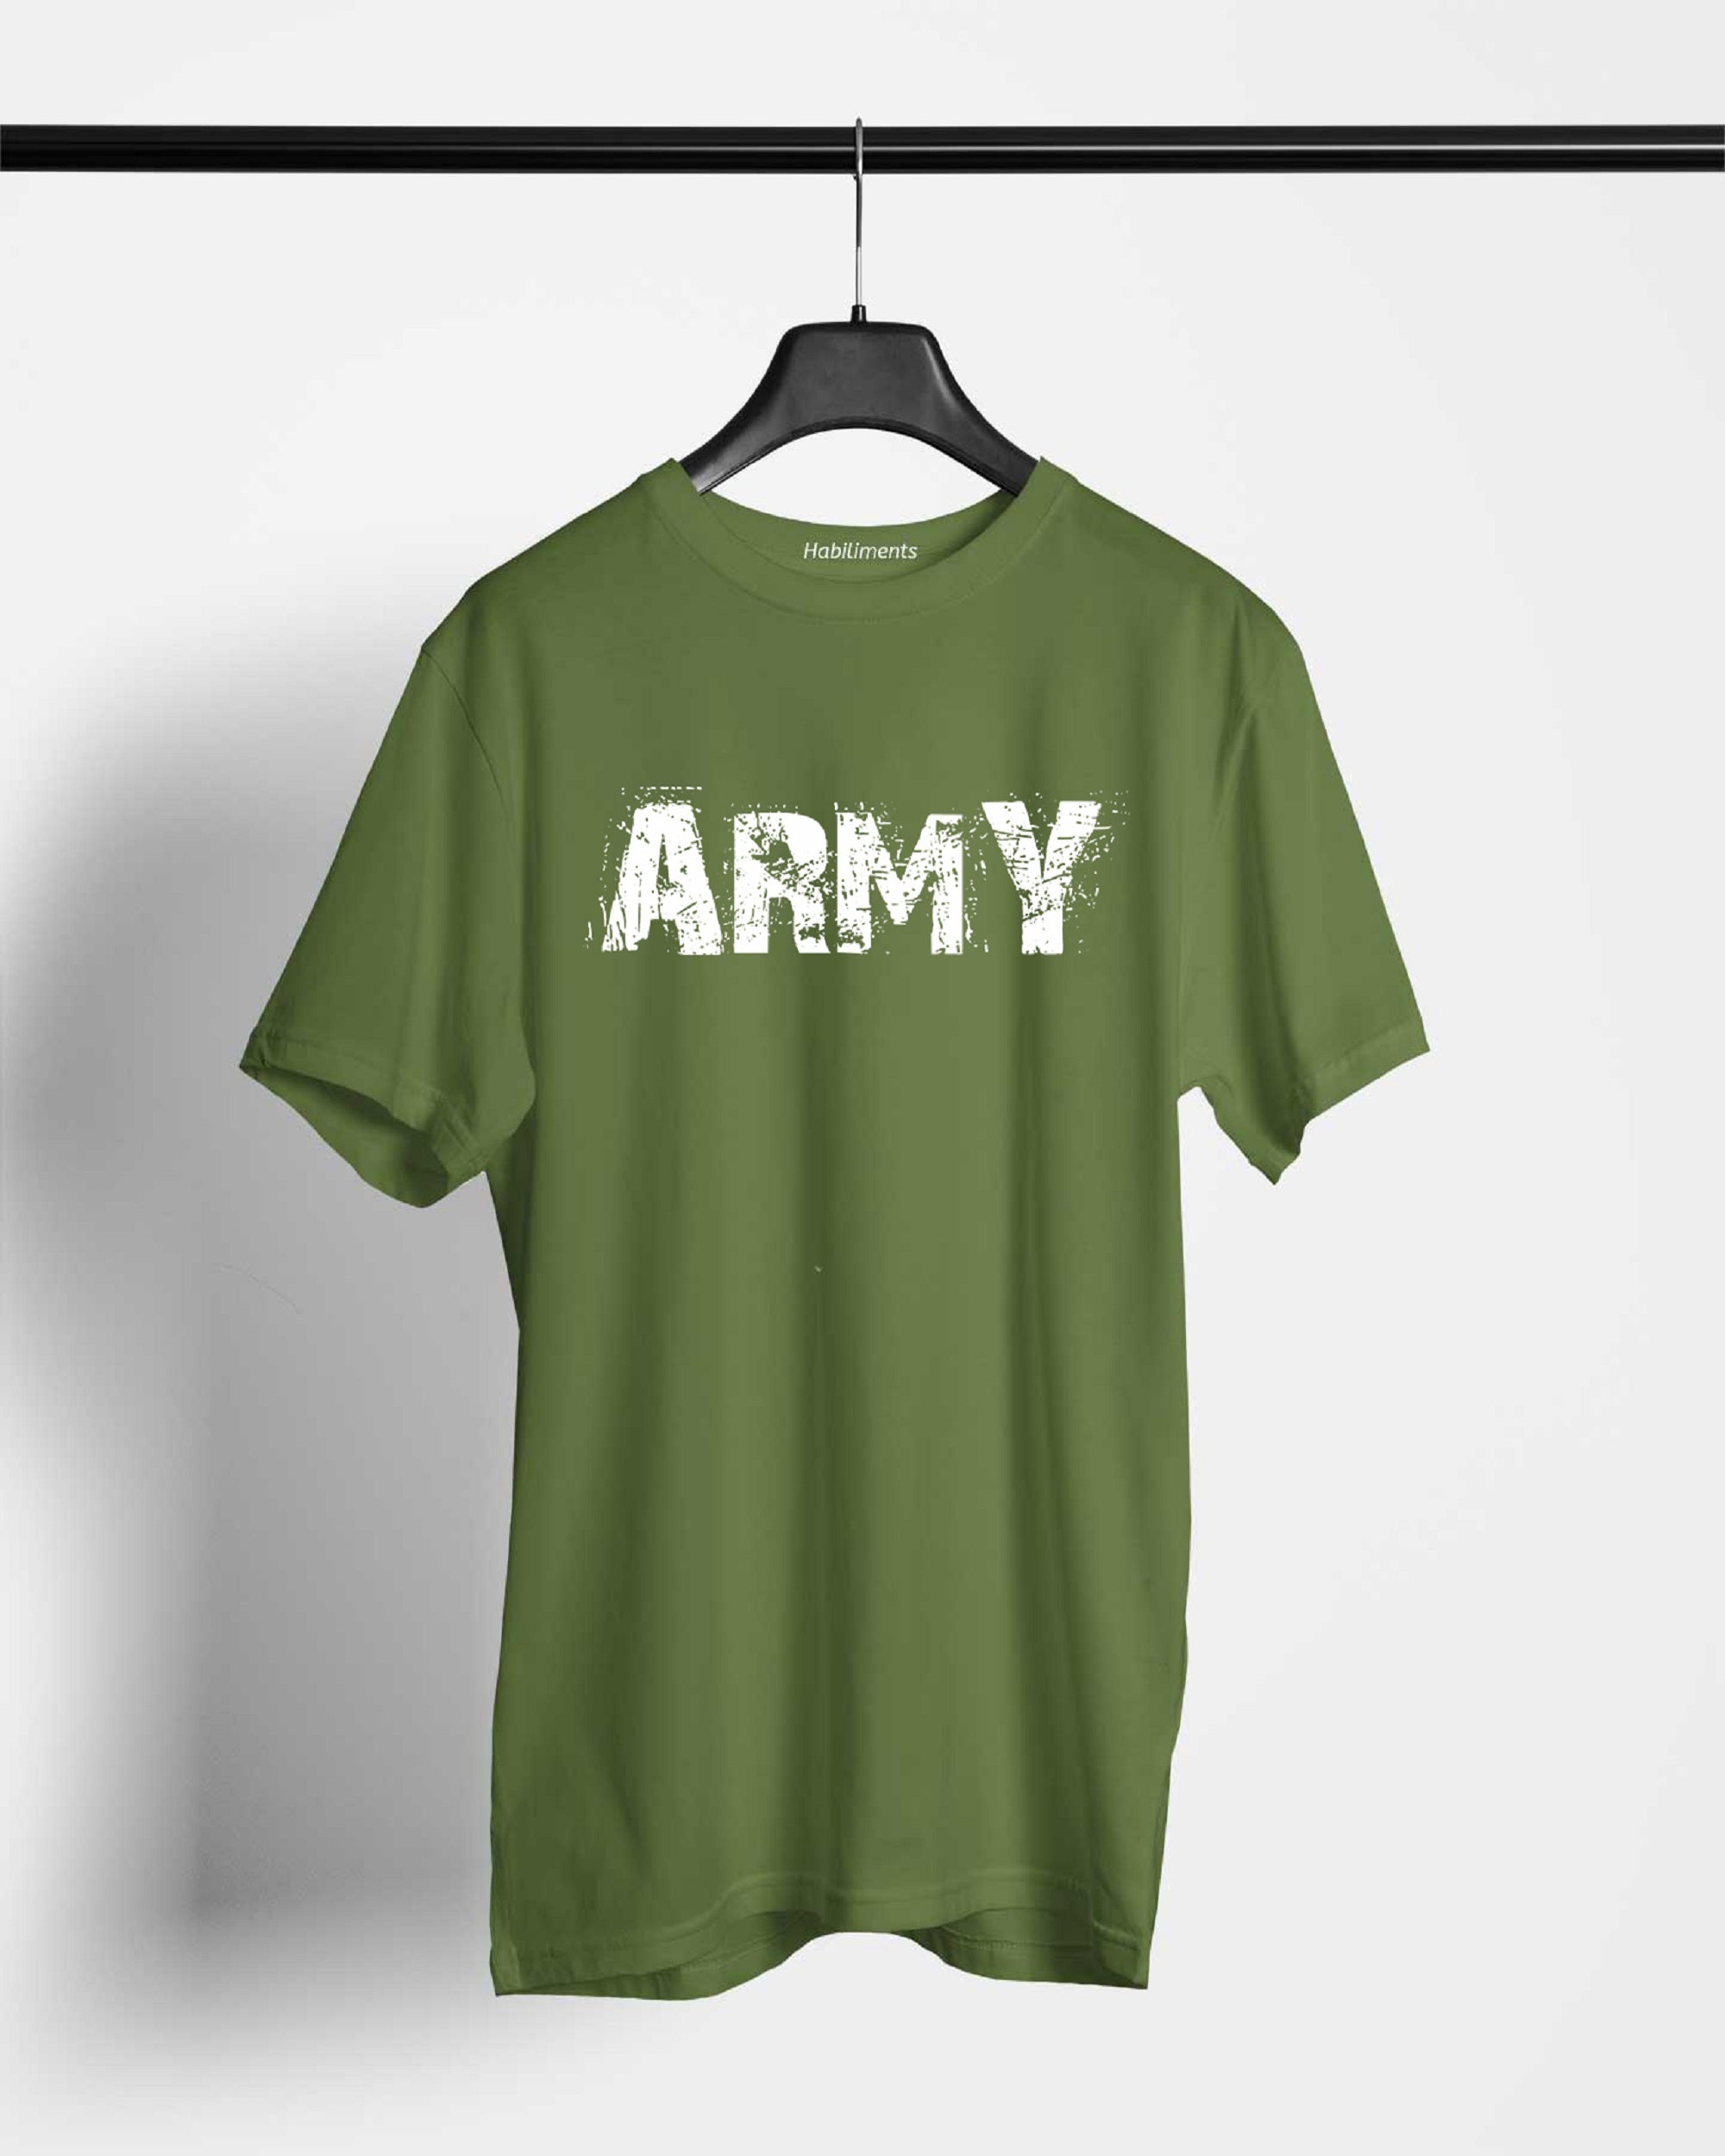 Army T-Shirts For Men || Green || Stylish Tshirts || 100% Cotton || Best T-Shirt For Men's